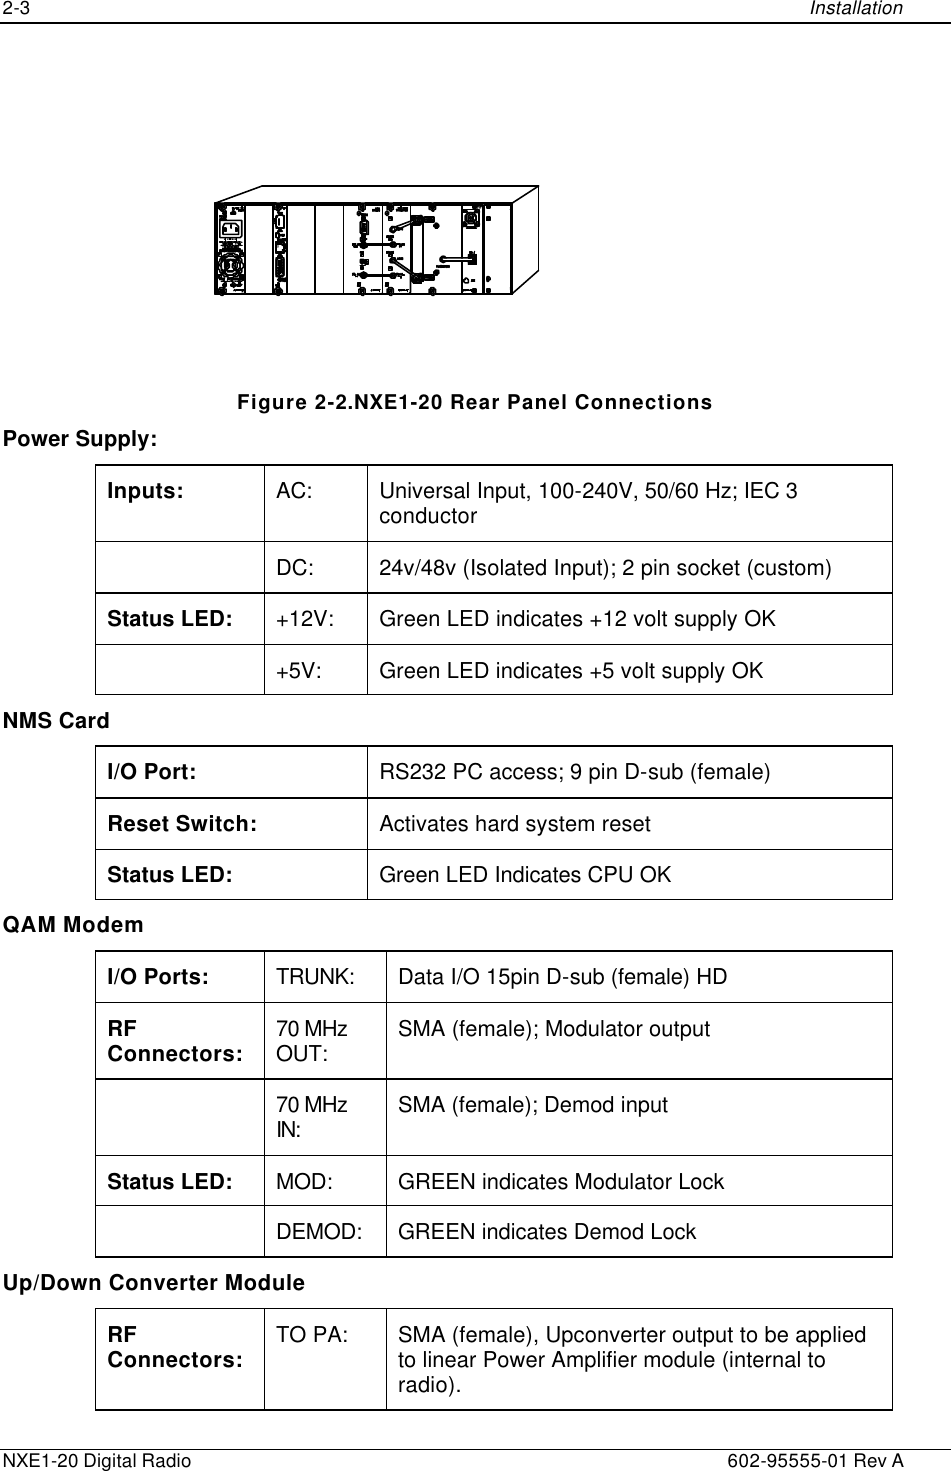 2-3    Installation  NXE1-20 Digital Radio    602-95555-01 Rev A   Figure 2-2.NXE1-20 Rear Panel Connections Power Supply: Inputs: AC: Universal Input, 100-240V, 50/60 Hz; IEC 3 conductor  DC: 24v/48v (Isolated Input); 2 pin socket (custom) Status LED: +12V: Green LED indicates +12 volt supply OK  +5V:     Green LED indicates +5 volt supply OK NMS Card I/O Port: RS232 PC access; 9 pin D-sub (female) Reset Switch: Activates hard system reset Status LED: Green LED Indicates CPU OK QAM Modem I/O Ports: TRUNK: Data I/O 15pin D-sub (female) HD RF Connectors: 70 MHz OUT: SMA (female); Modulator output  70 MHz IN: SMA (female); Demod input Status LED: MOD:    GREEN indicates Modulator Lock  DEMOD: GREEN indicates Demod Lock Up/Down Converter Module RF Connectors: TO PA: SMA (female), Upconverter output to be applied to linear Power Amplifier module (internal to radio). 